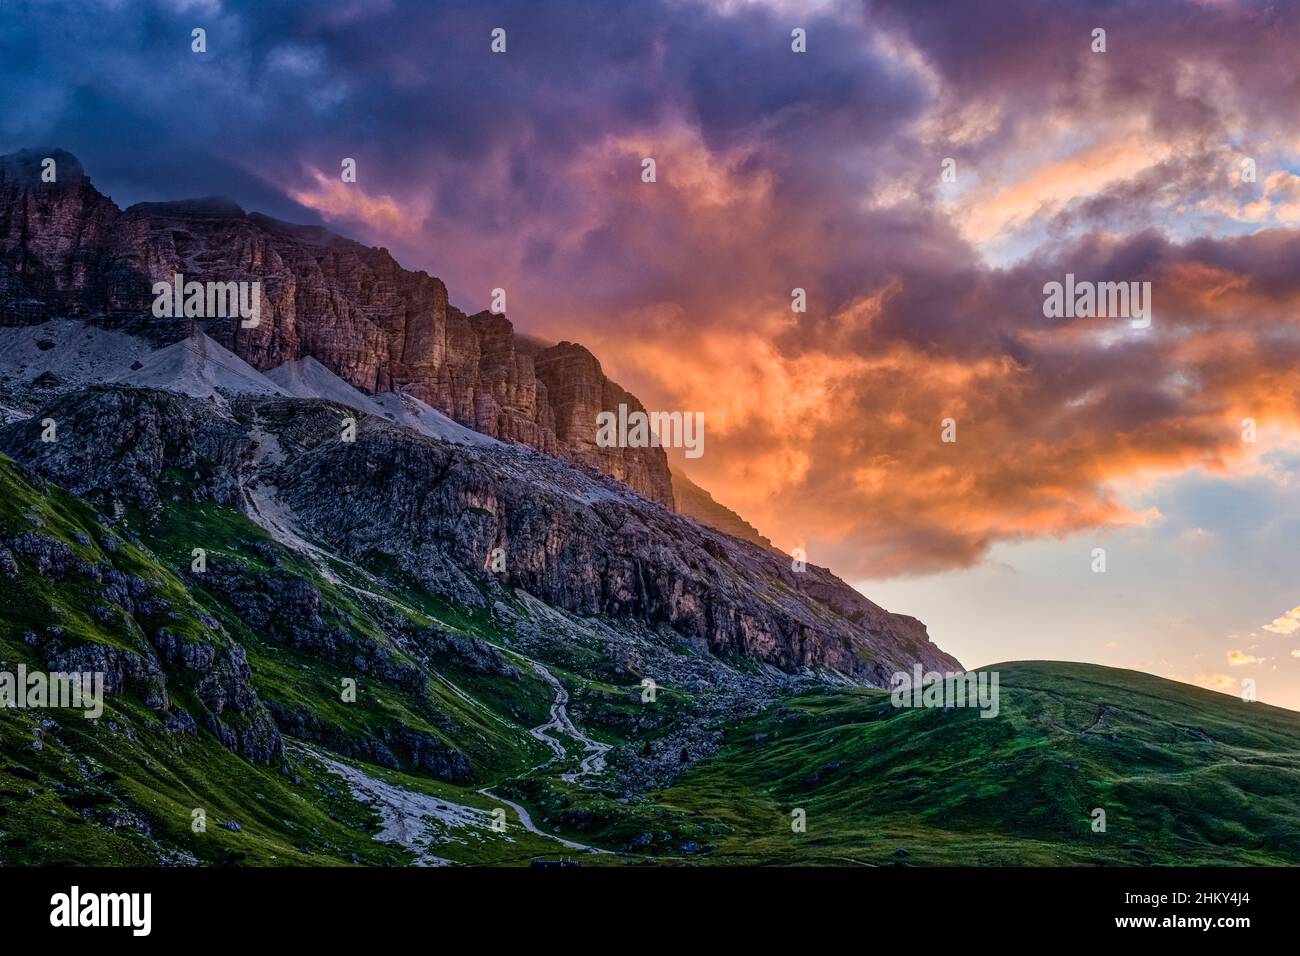 Rock faces of the Sella group, seen from Pordoi Pass at sunrise. Stock Photo